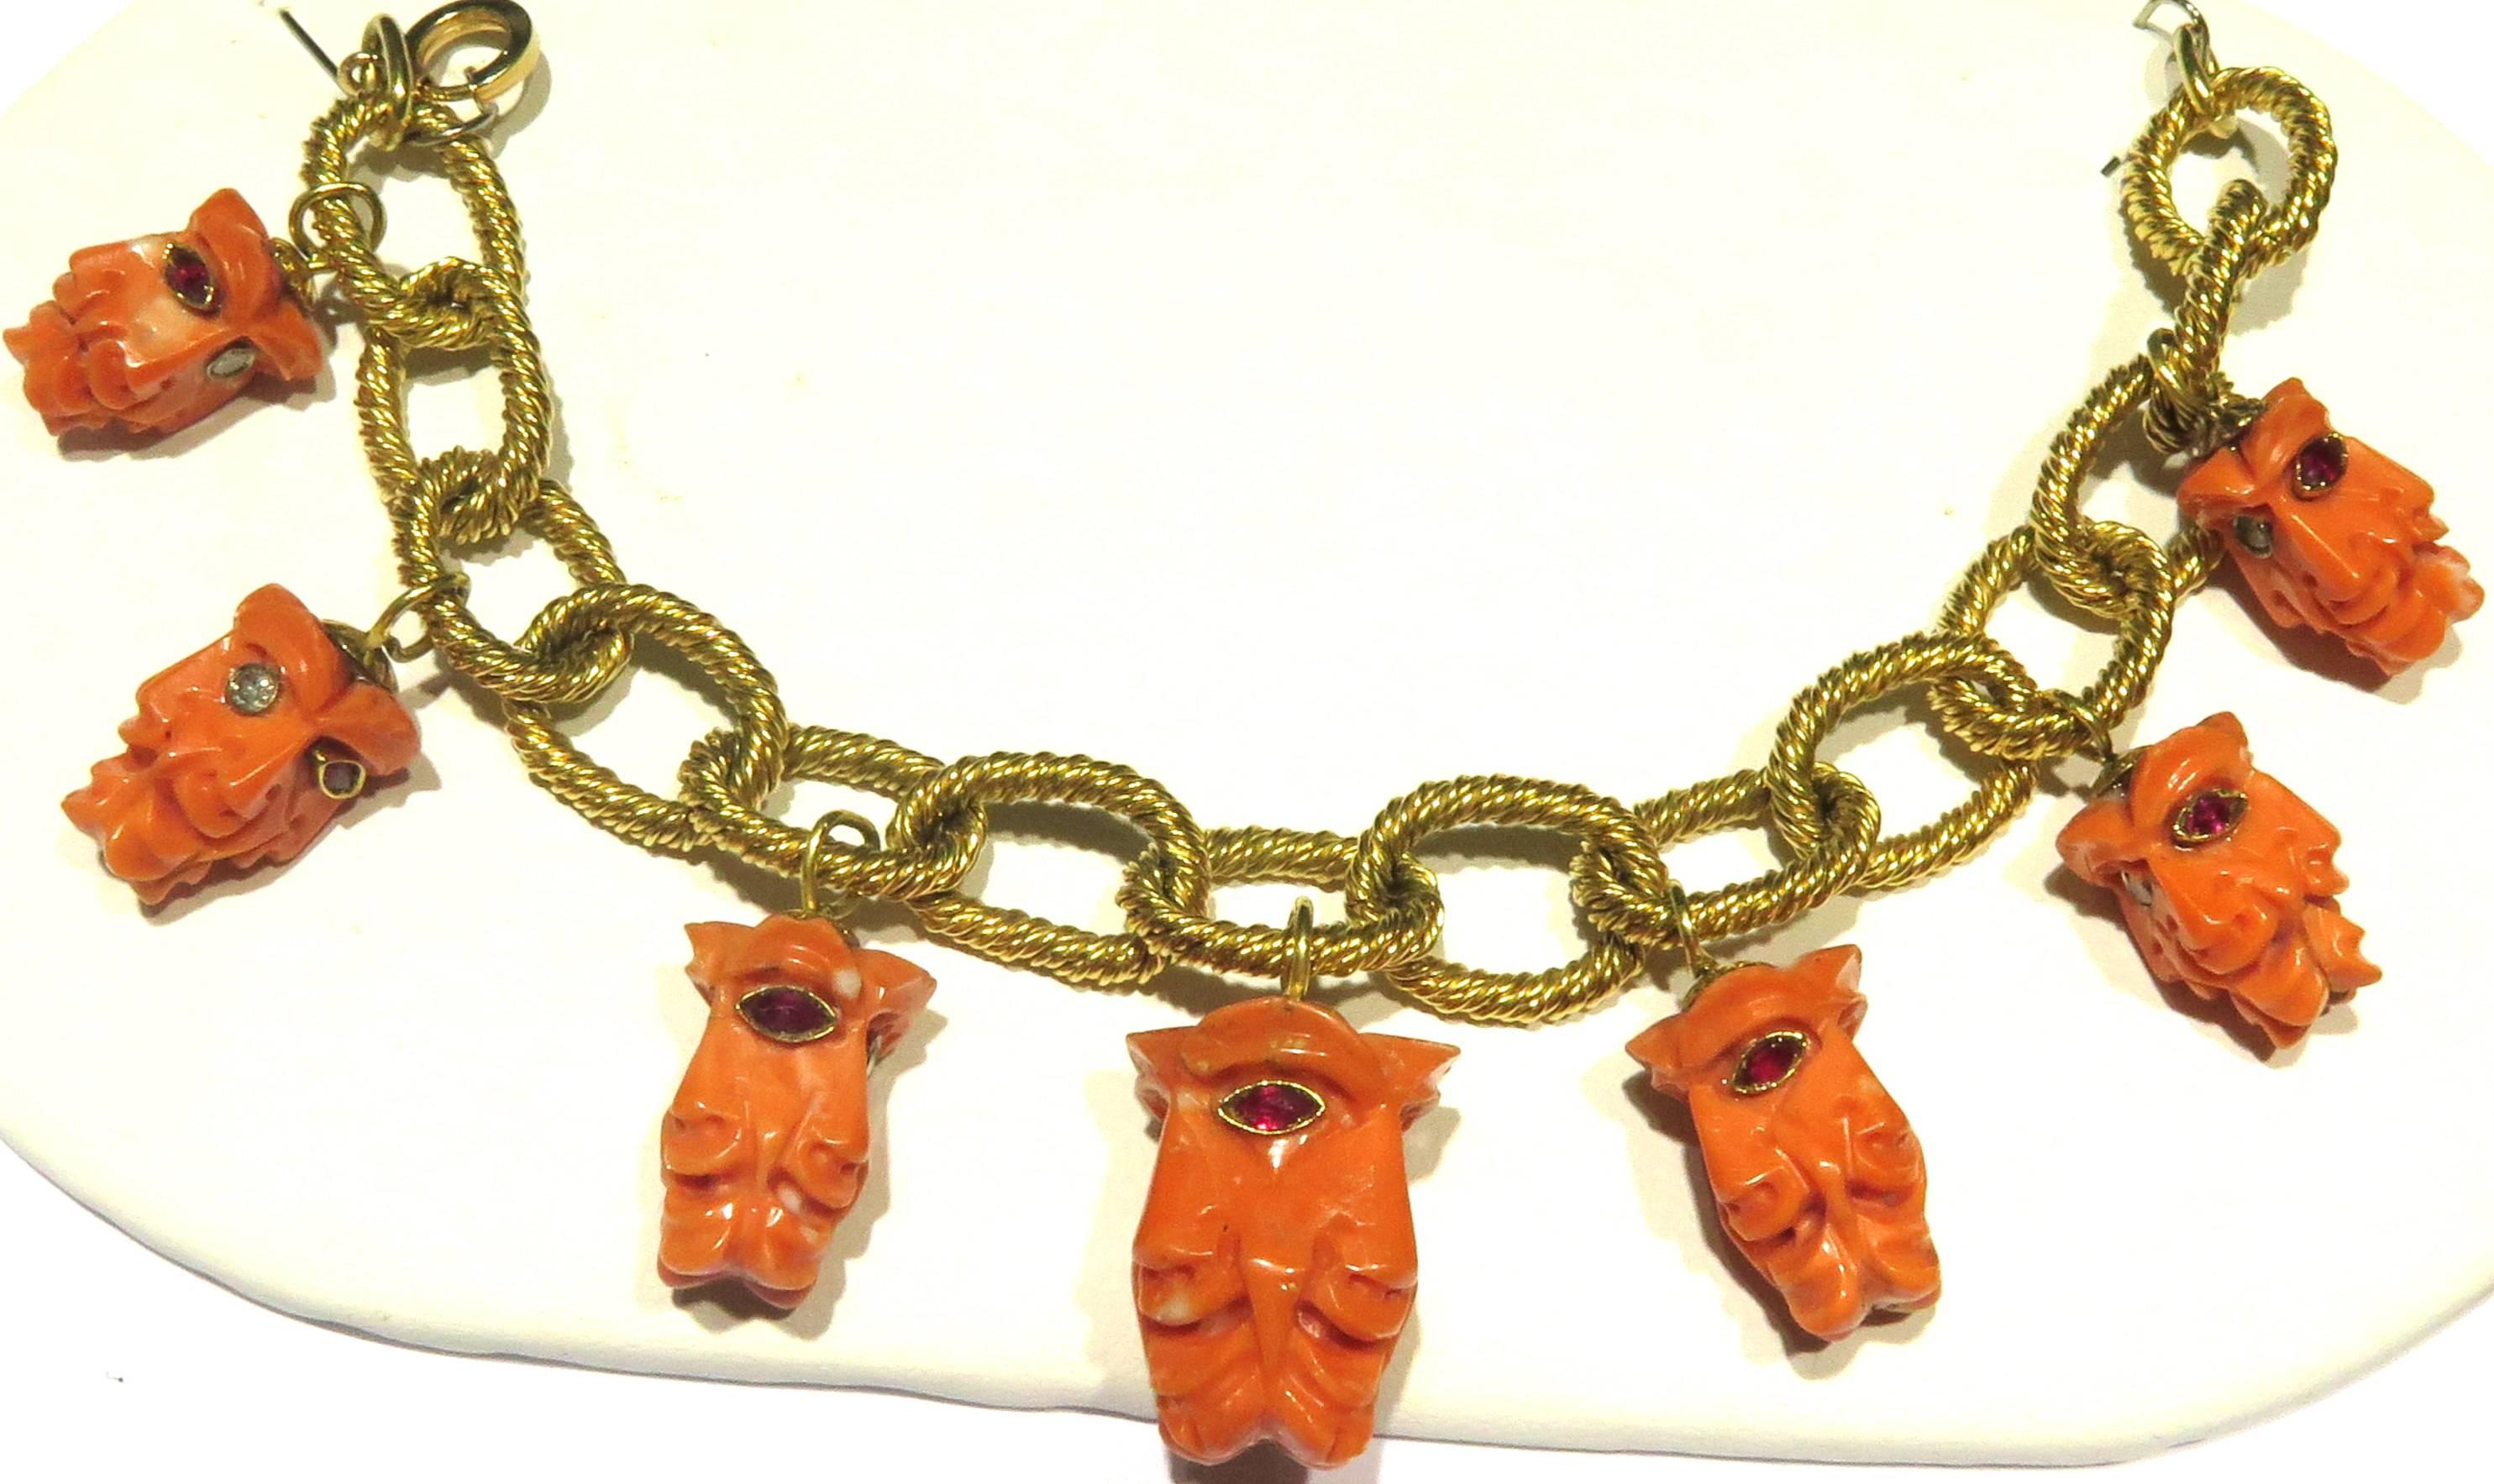 This amazing bracelet is just incredibly unique. First the bracelet is made of 18k large heavy rope motif links. Then each of the 7 carved coral charms has been carved in a way that it has 4 faces. Each side of its 4 faces has 1 bezel set ruby & 1